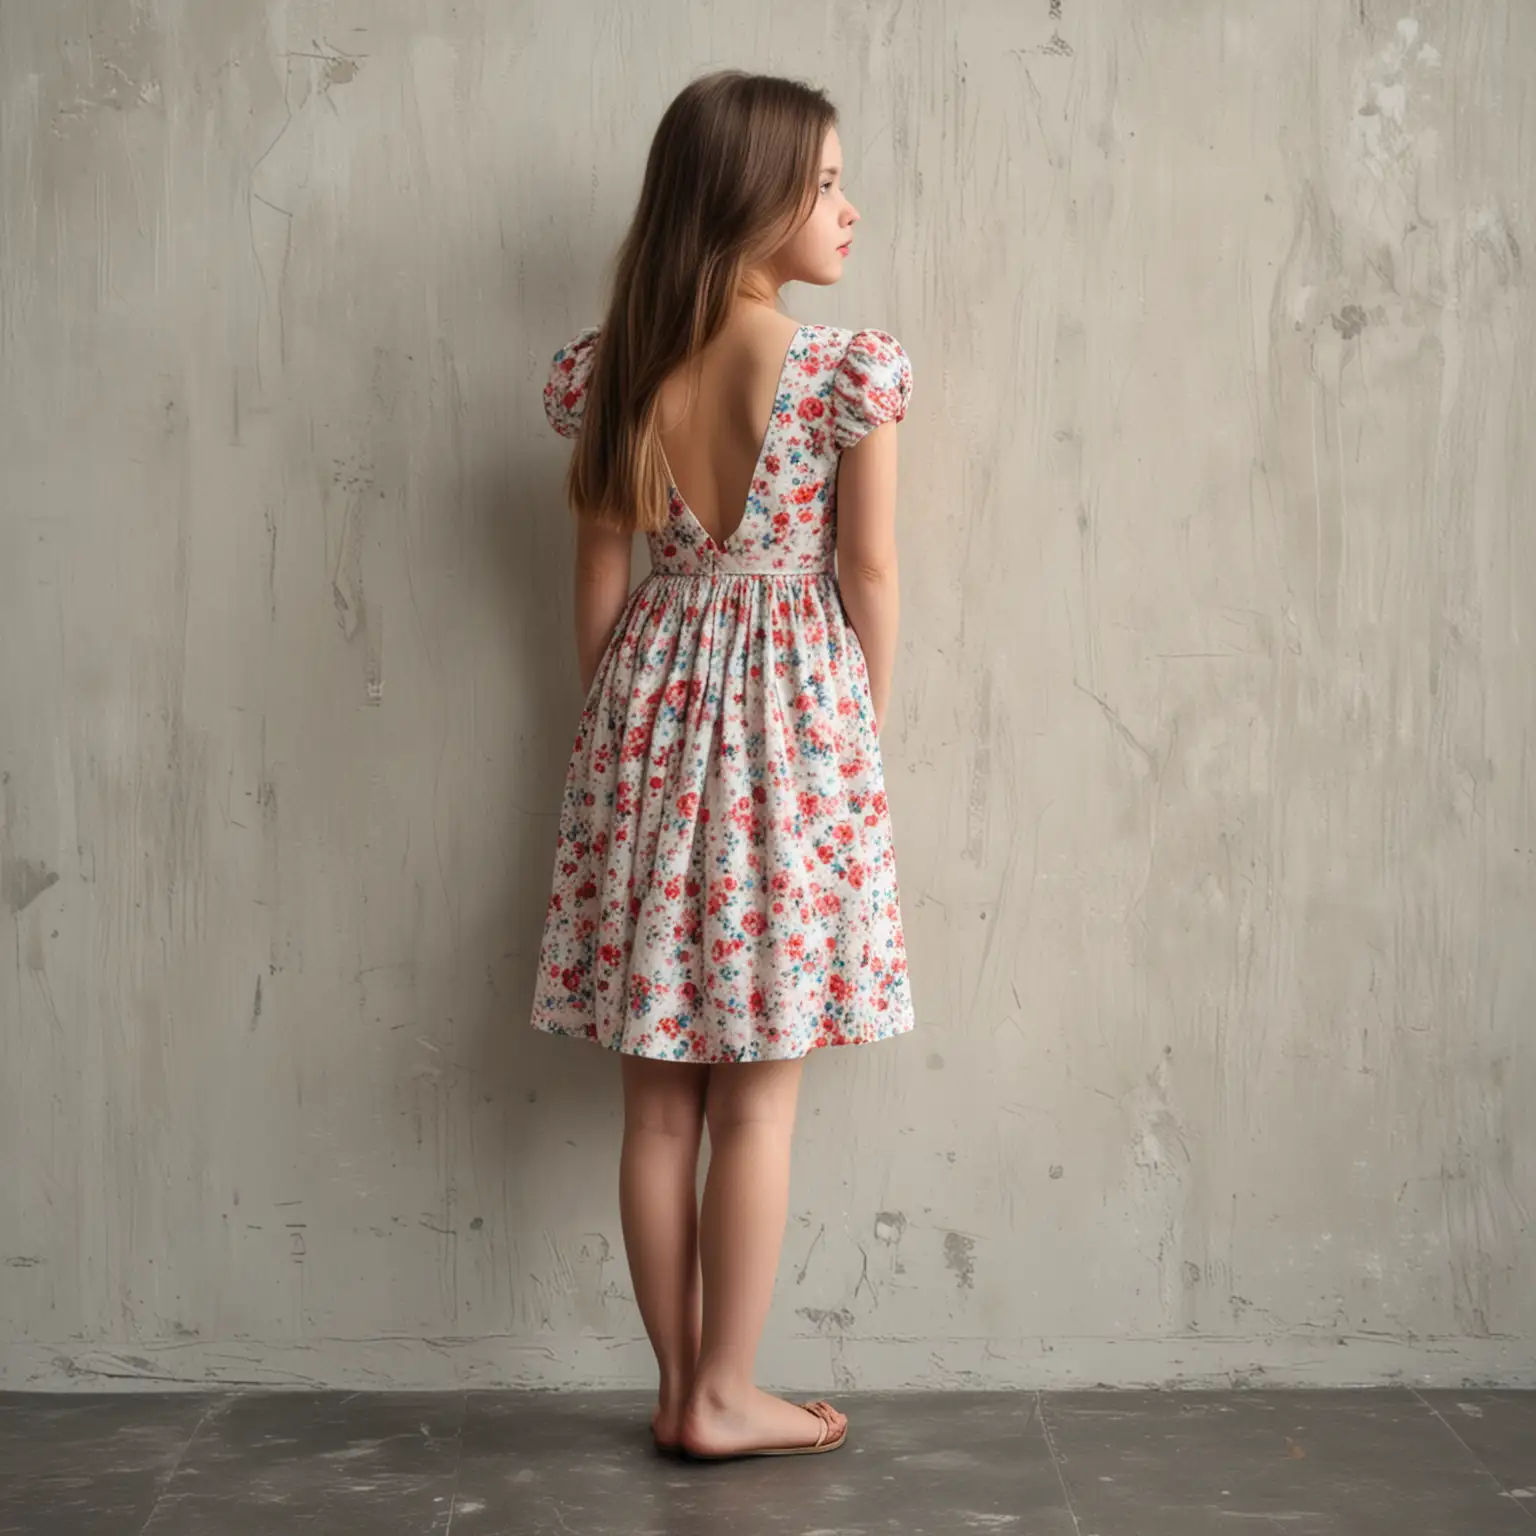 Girl-in-Dress-Contemplating-the-Wall